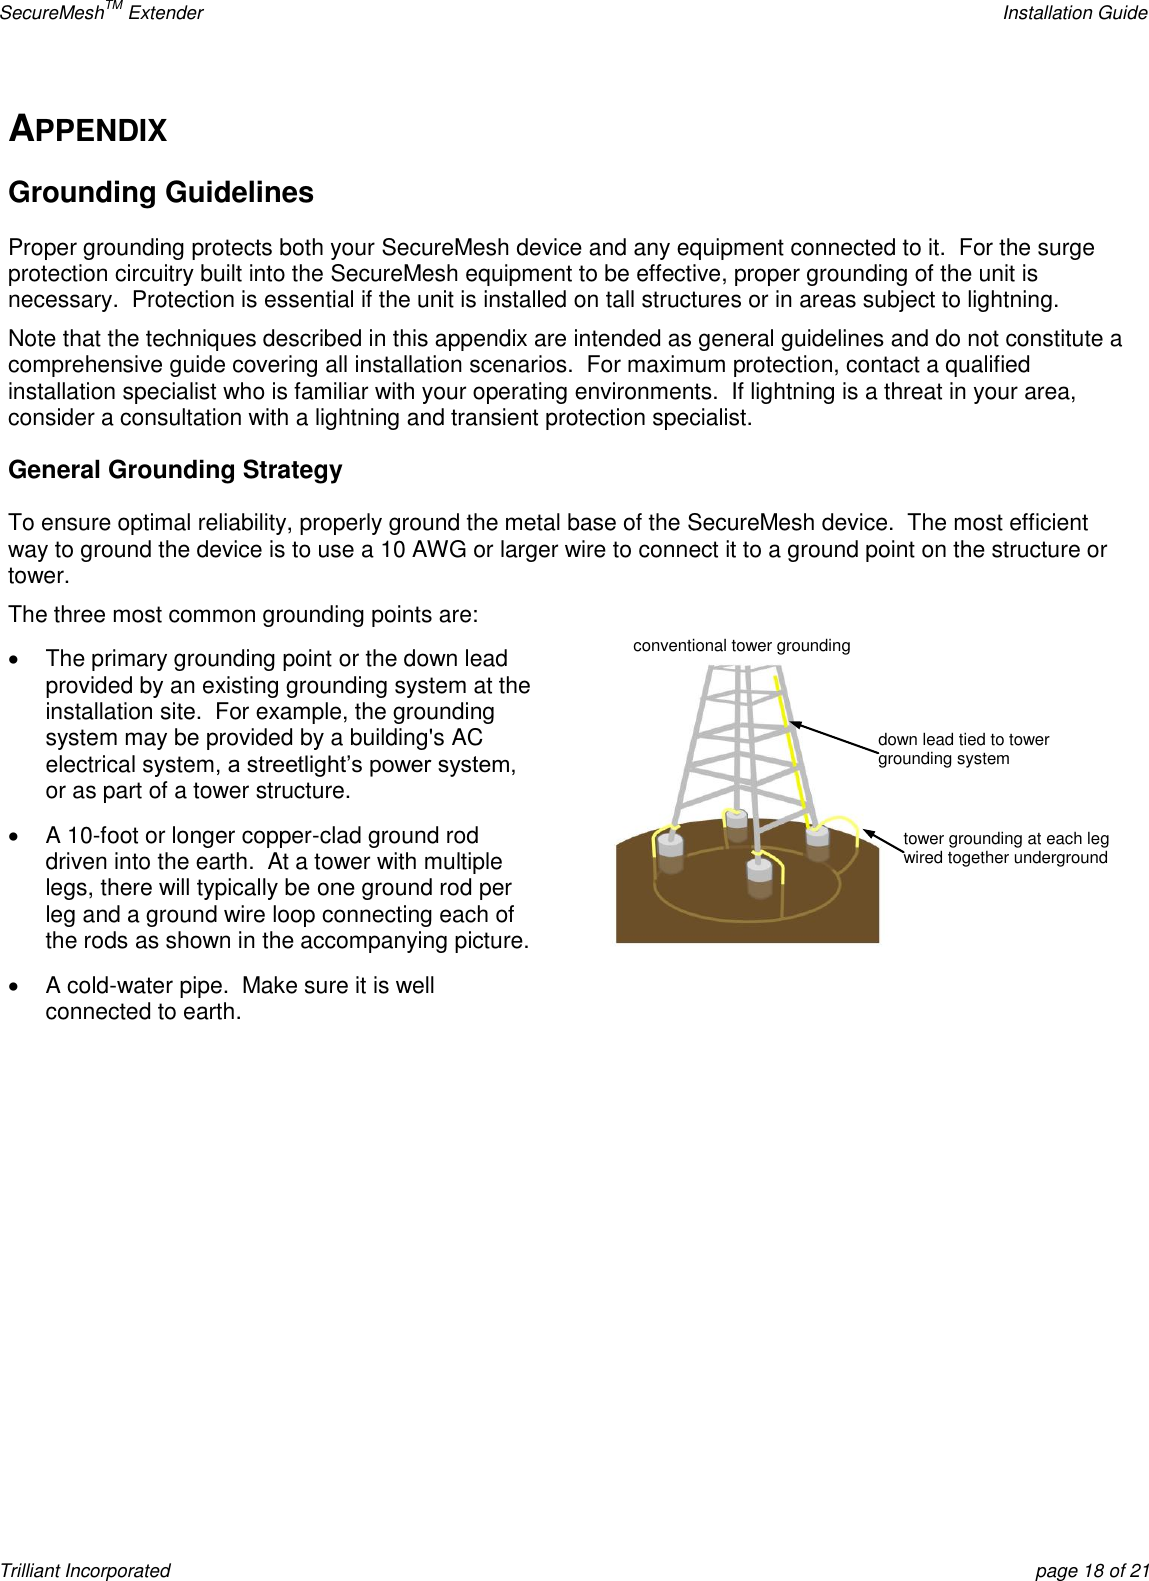 SecureMeshTM Extender    Installation Guide Trilliant Incorporated  page 18 of 21 APPENDIX Grounding Guidelines Proper grounding protects both your SecureMesh device and any equipment connected to it.  For the surge protection circuitry built into the SecureMesh equipment to be effective, proper grounding of the unit is necessary.  Protection is essential if the unit is installed on tall structures or in areas subject to lightning. Note that the techniques described in this appendix are intended as general guidelines and do not constitute a comprehensive guide covering all installation scenarios.  For maximum protection, contact a qualified installation specialist who is familiar with your operating environments.  If lightning is a threat in your area, consider a consultation with a lightning and transient protection specialist. General Grounding Strategy To ensure optimal reliability, properly ground the metal base of the SecureMesh device.  The most efficient way to ground the device is to use a 10 AWG or larger wire to connect it to a ground point on the structure or tower. The three most common grounding points are:   The primary grounding point or the down lead provided by an existing grounding system at the installation site.  For example, the grounding system may be provided by a building&apos;s AC electrical system, a streetlight’s power system, or as part of a tower structure.   A 10-foot or longer copper-clad ground rod driven into the earth.  At a tower with multiple legs, there will typically be one ground rod per leg and a ground wire loop connecting each of the rods as shown in the accompanying picture.    A cold-water pipe.  Make sure it is well connected to earth.   tower grounding at each leg wired together underground  down lead tied to tower grounding system  conventional tower grounding  